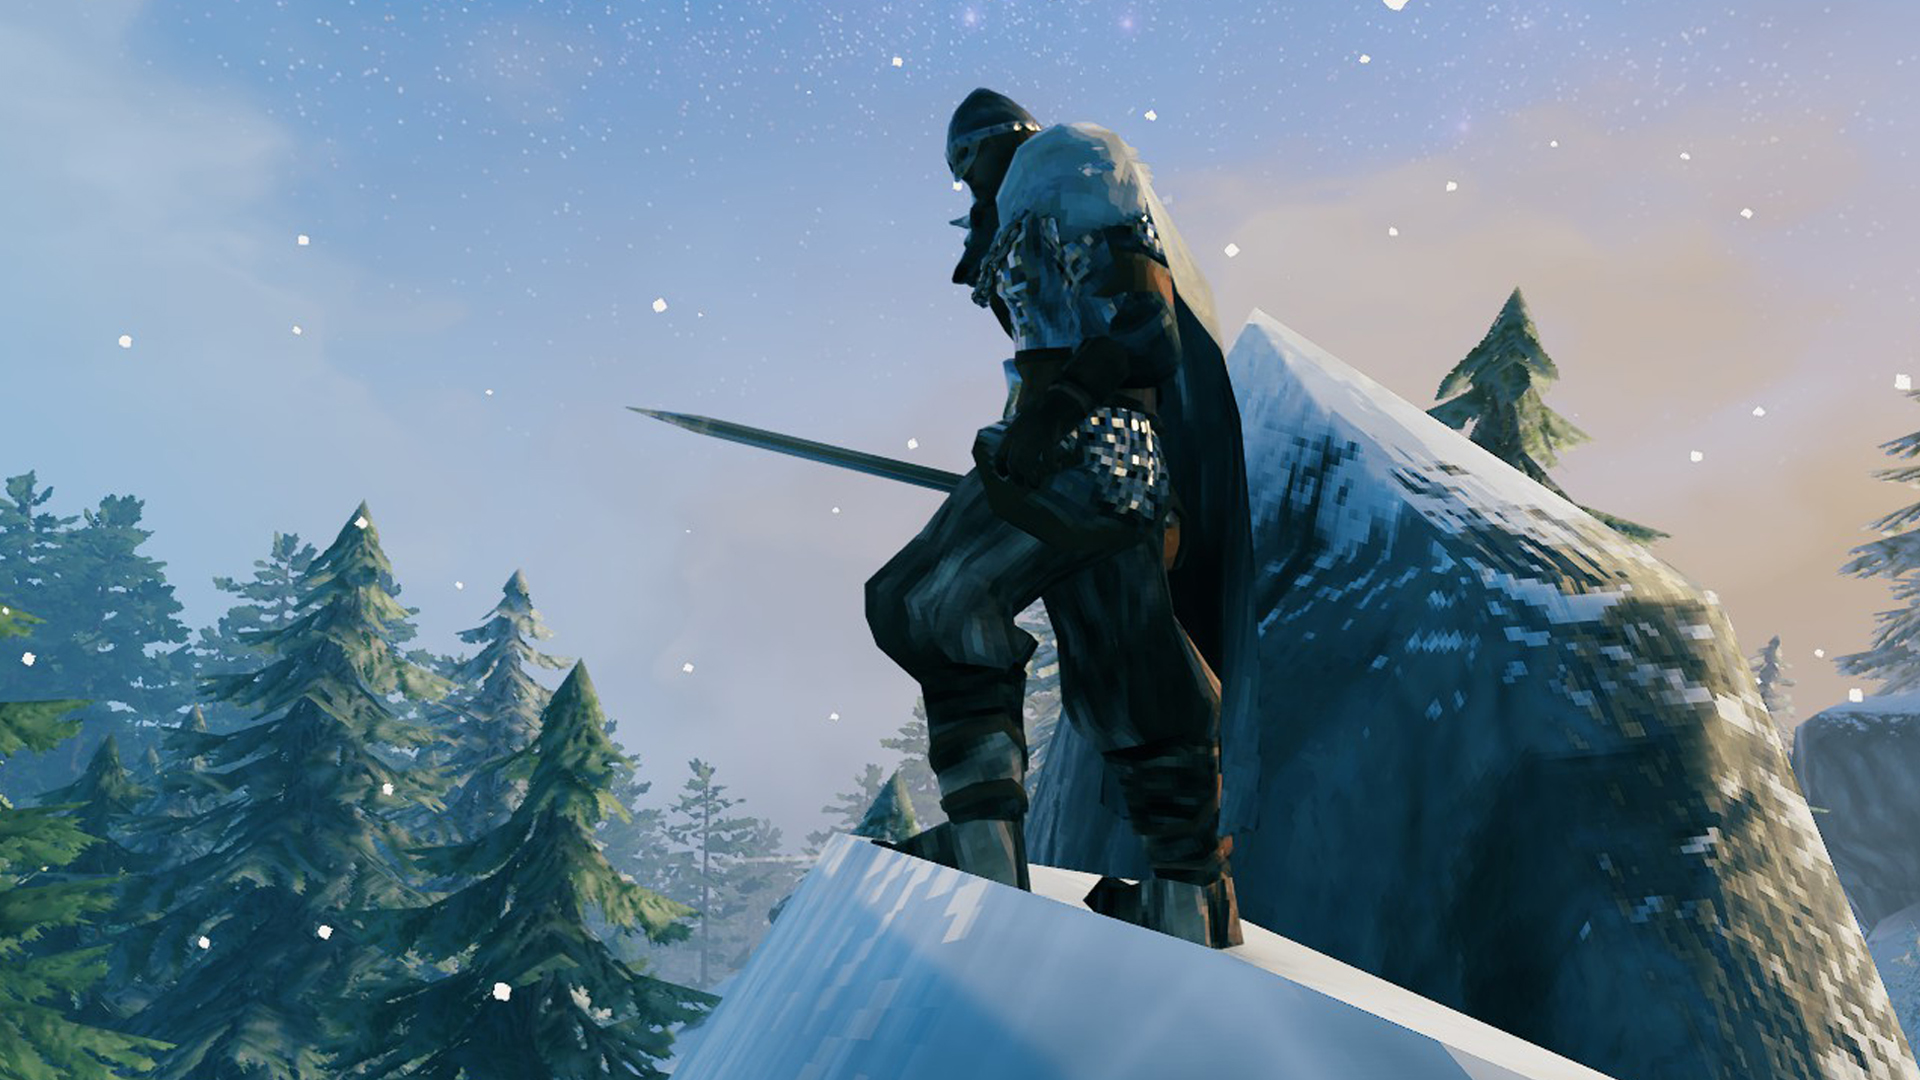 Valheim - a viking stands on top of a snowy peak wearing silver armor